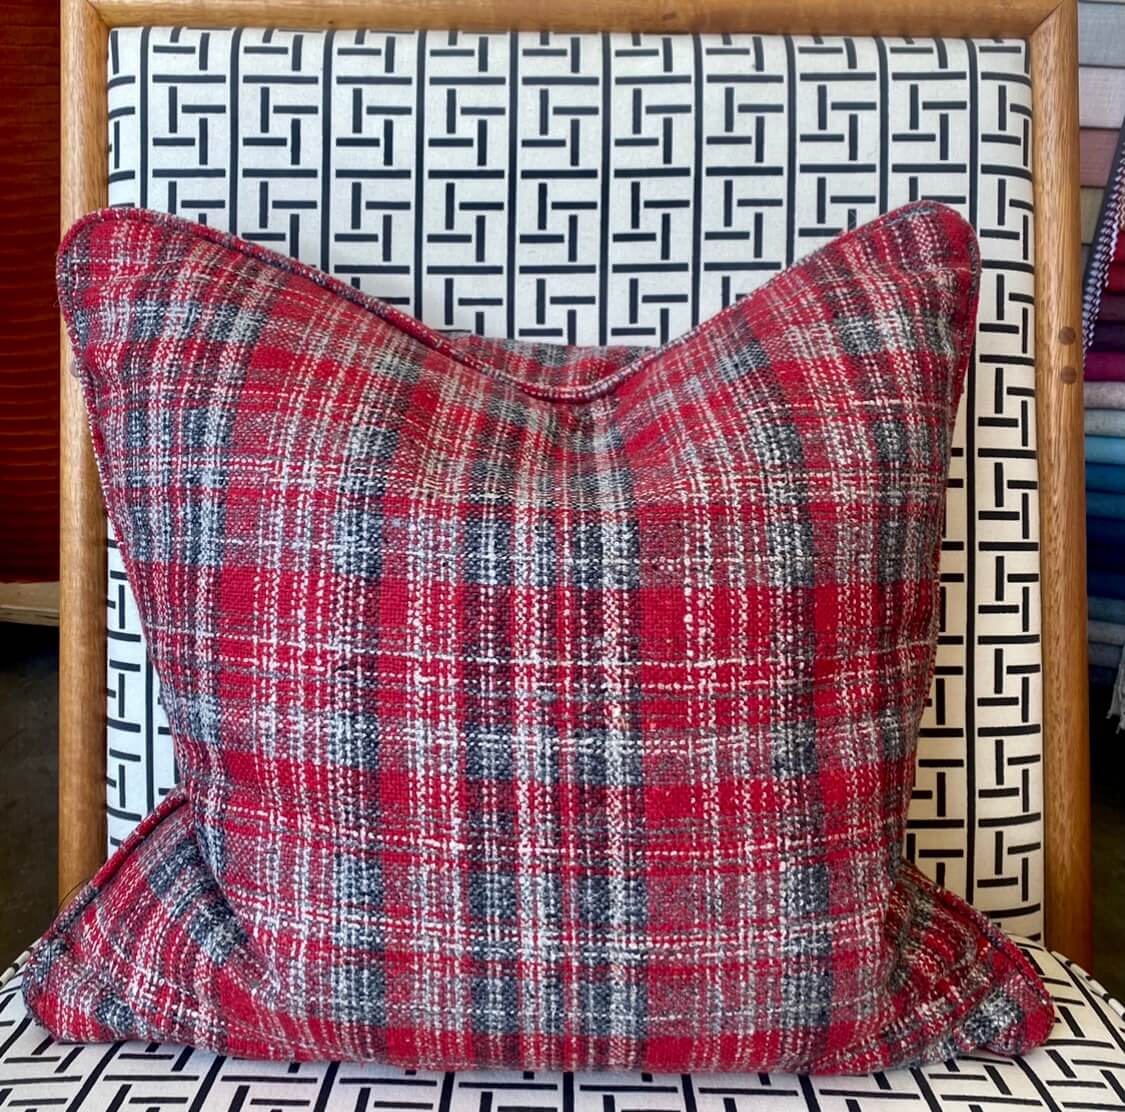 Plaid Wollen Upholstery Fabric.